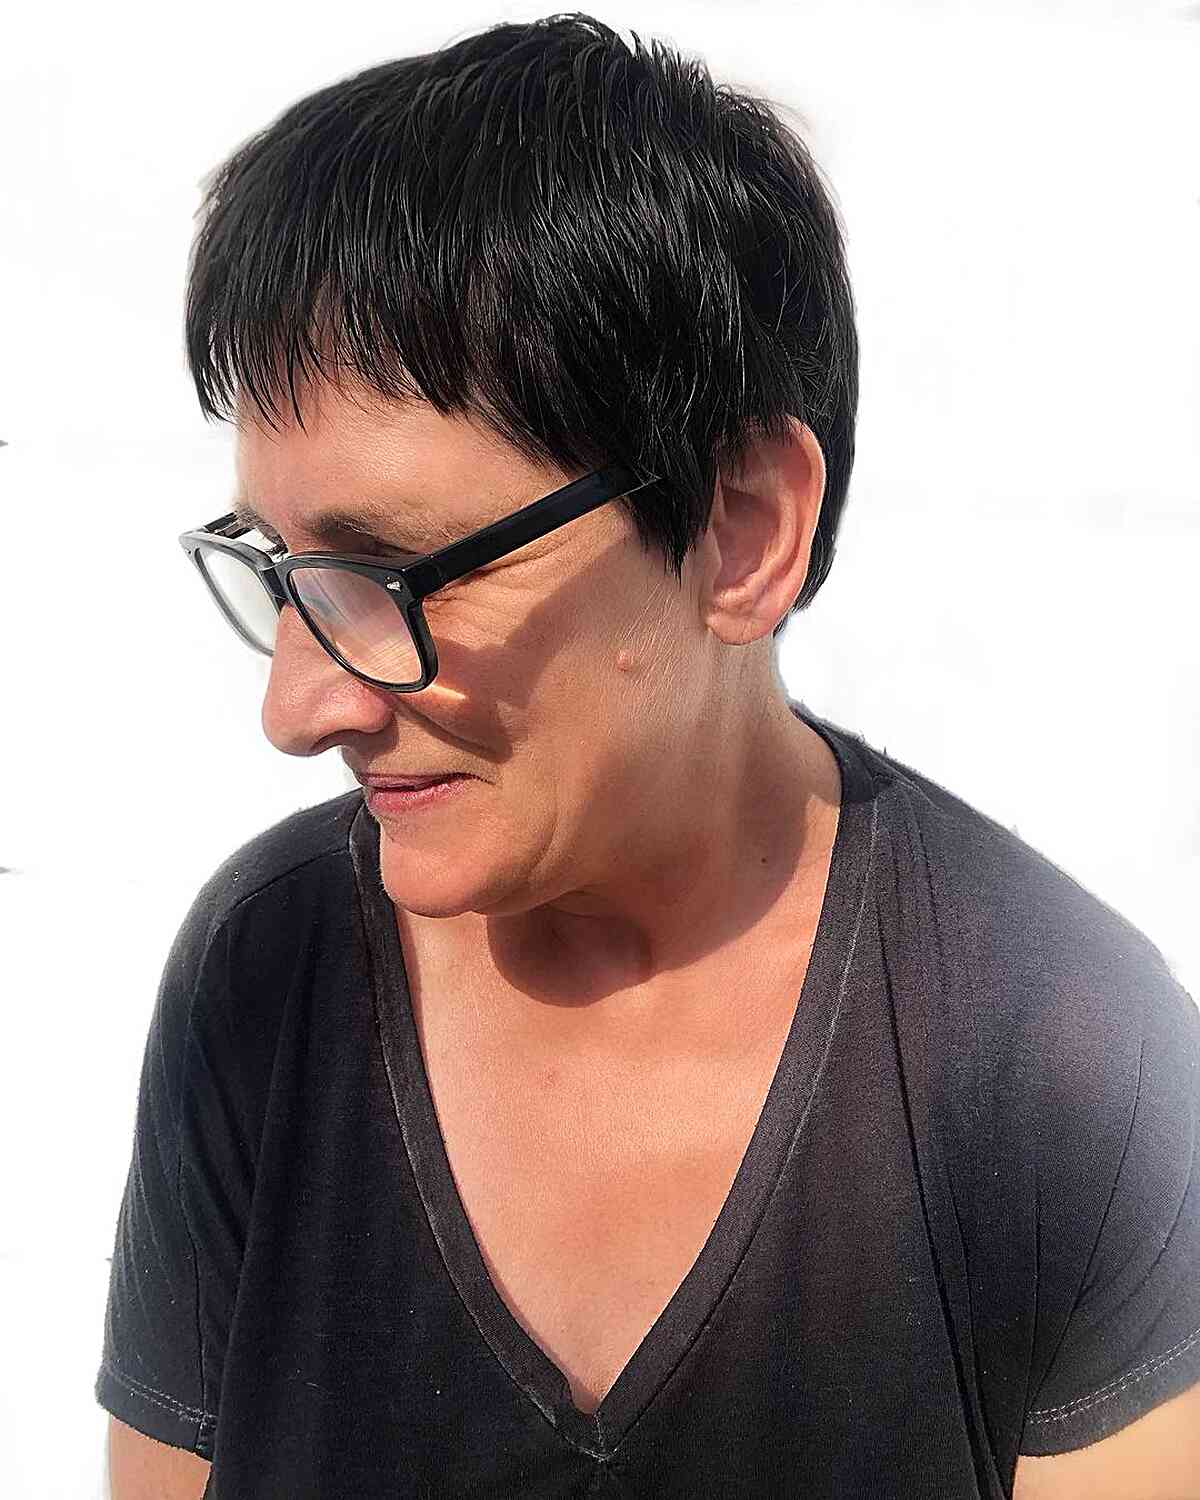 Low-Maintenance Short Pixie Hair with Choppy Bangs for Ladies Aged 50 with Eyeglasses